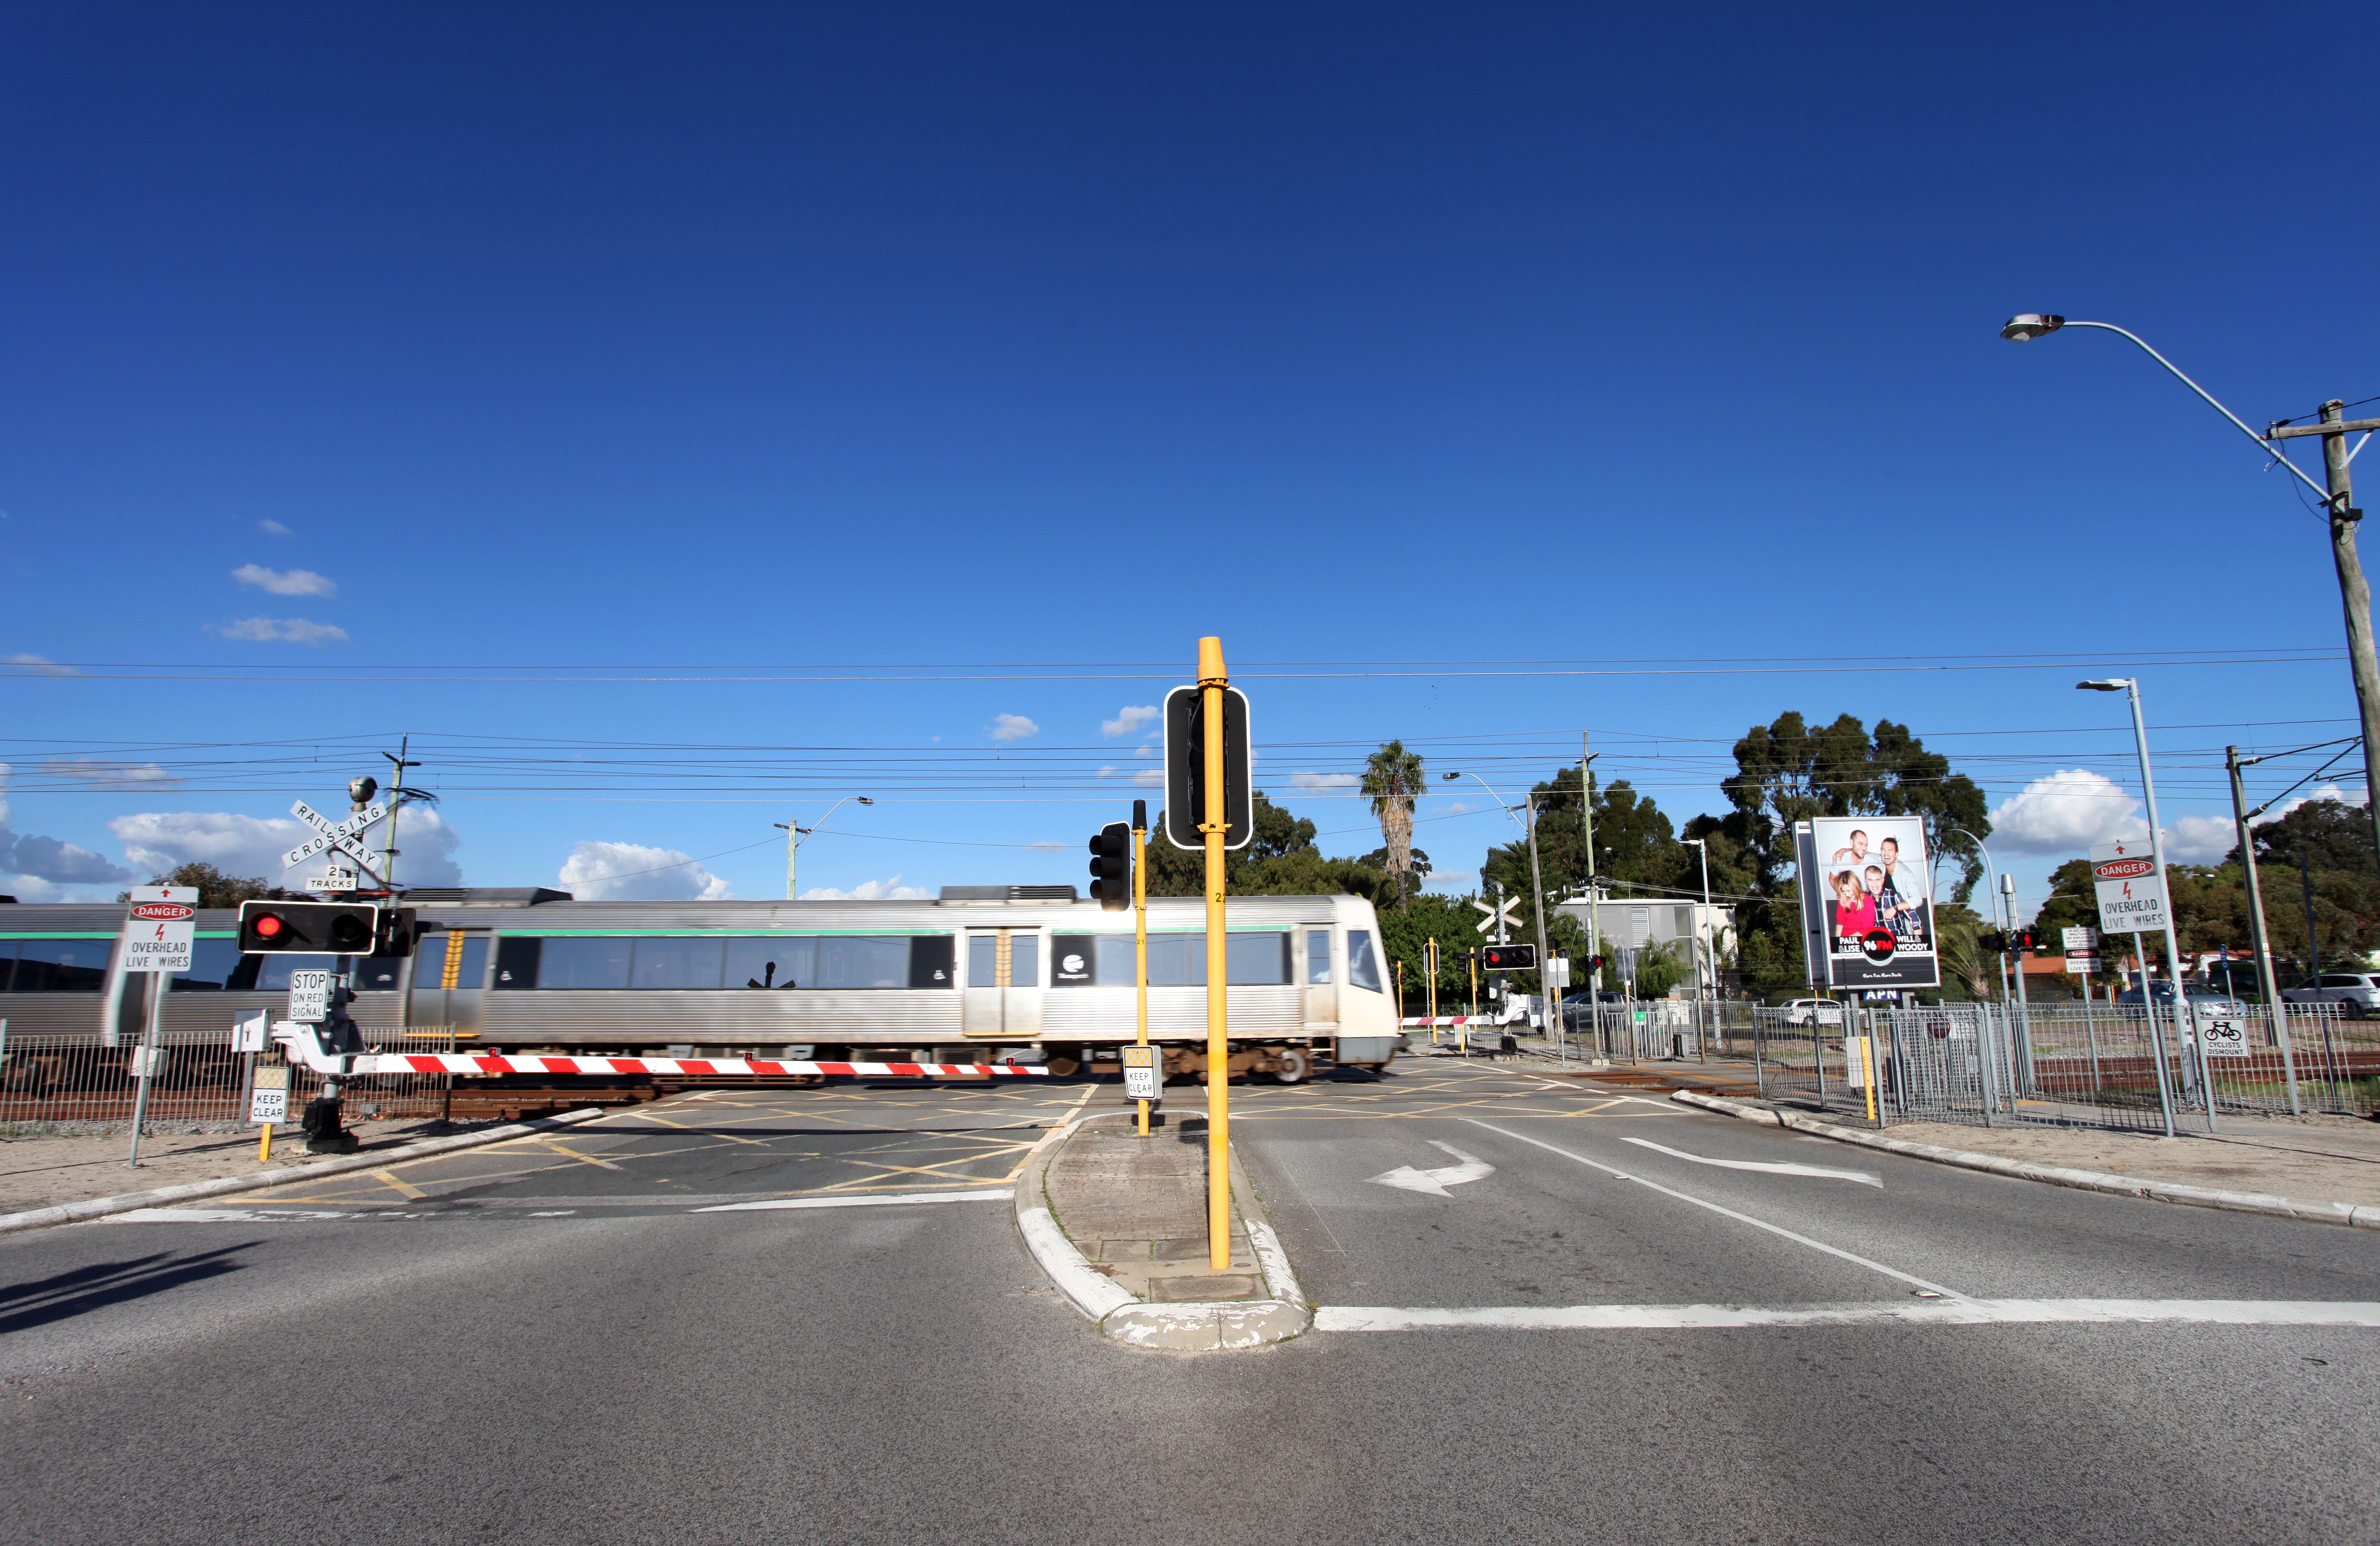 Level crossing down with train passing by